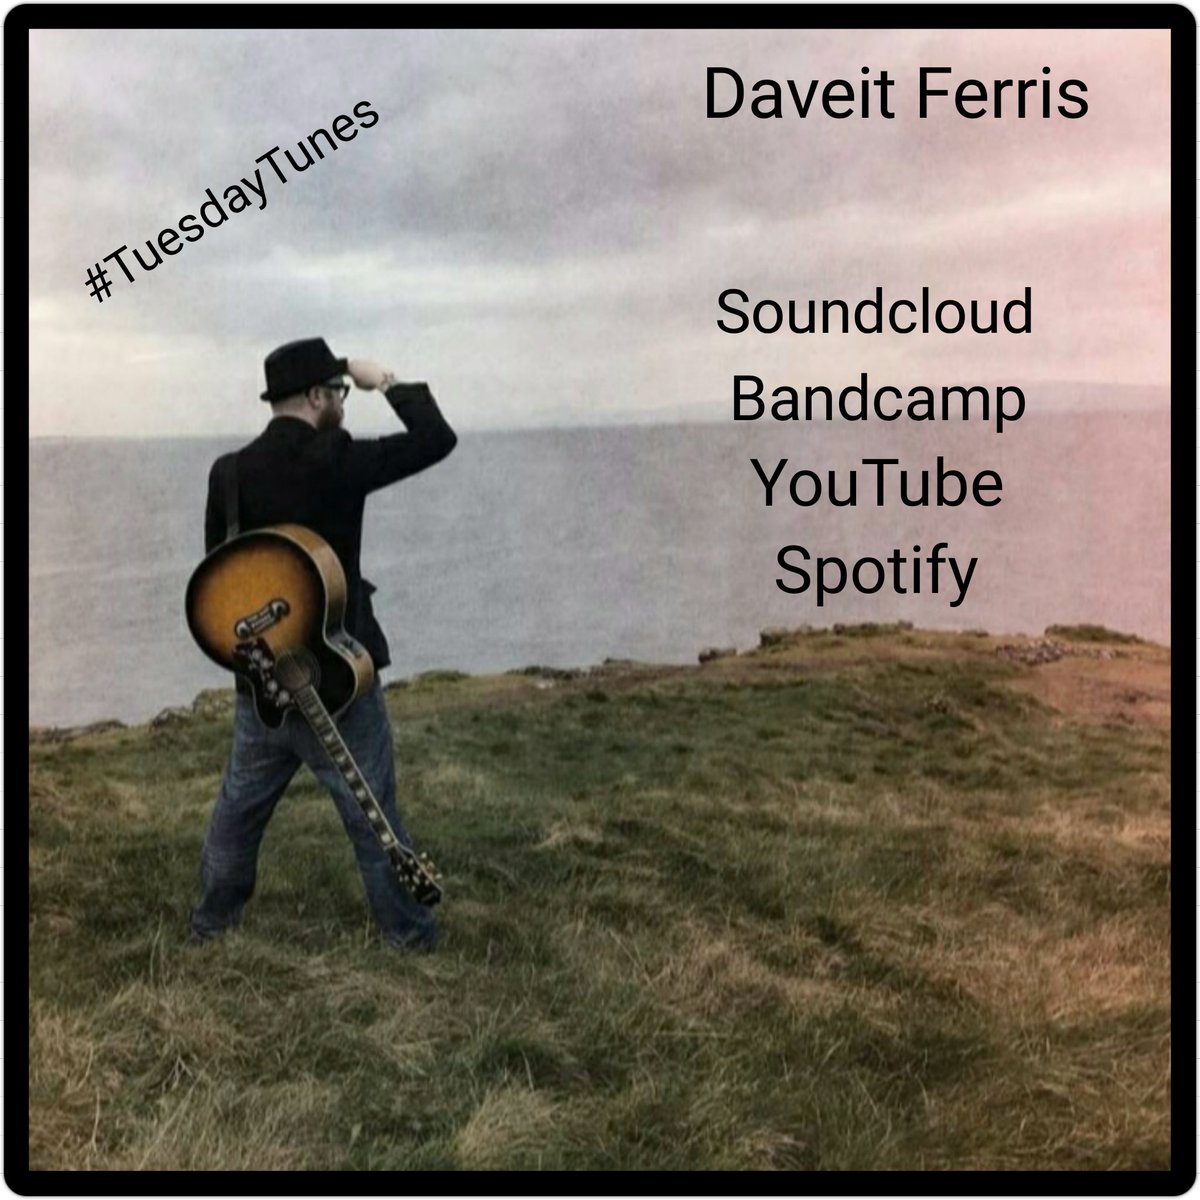 Your search for brilliant music just ended! Listen to @DaveitFerris and get the BEST #TuesdayTunes you've ever had in your ears. You can thank me later! #SupportArtists 

soundcloud.com/daveitferris

daveitferris.bandcamp.com 

youtube.com/channel/UCpKbj…

open.spotify.com/artist/2xXLh8k…